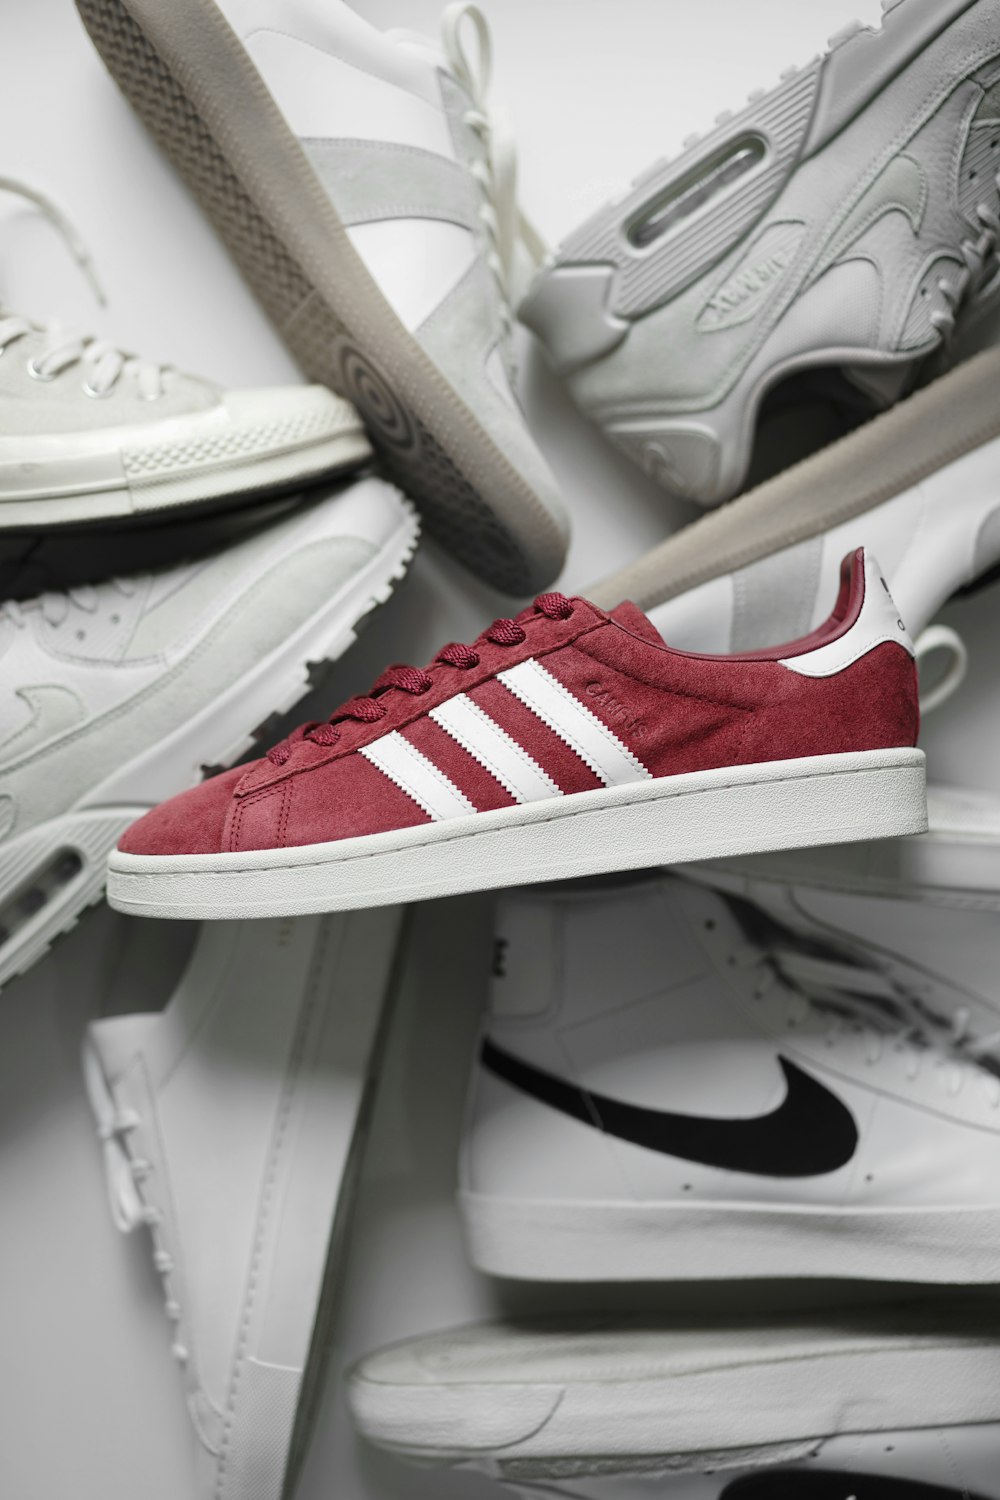 red and white adidas low top sneakers photo – Free Adidas campus Image on  Unsplash